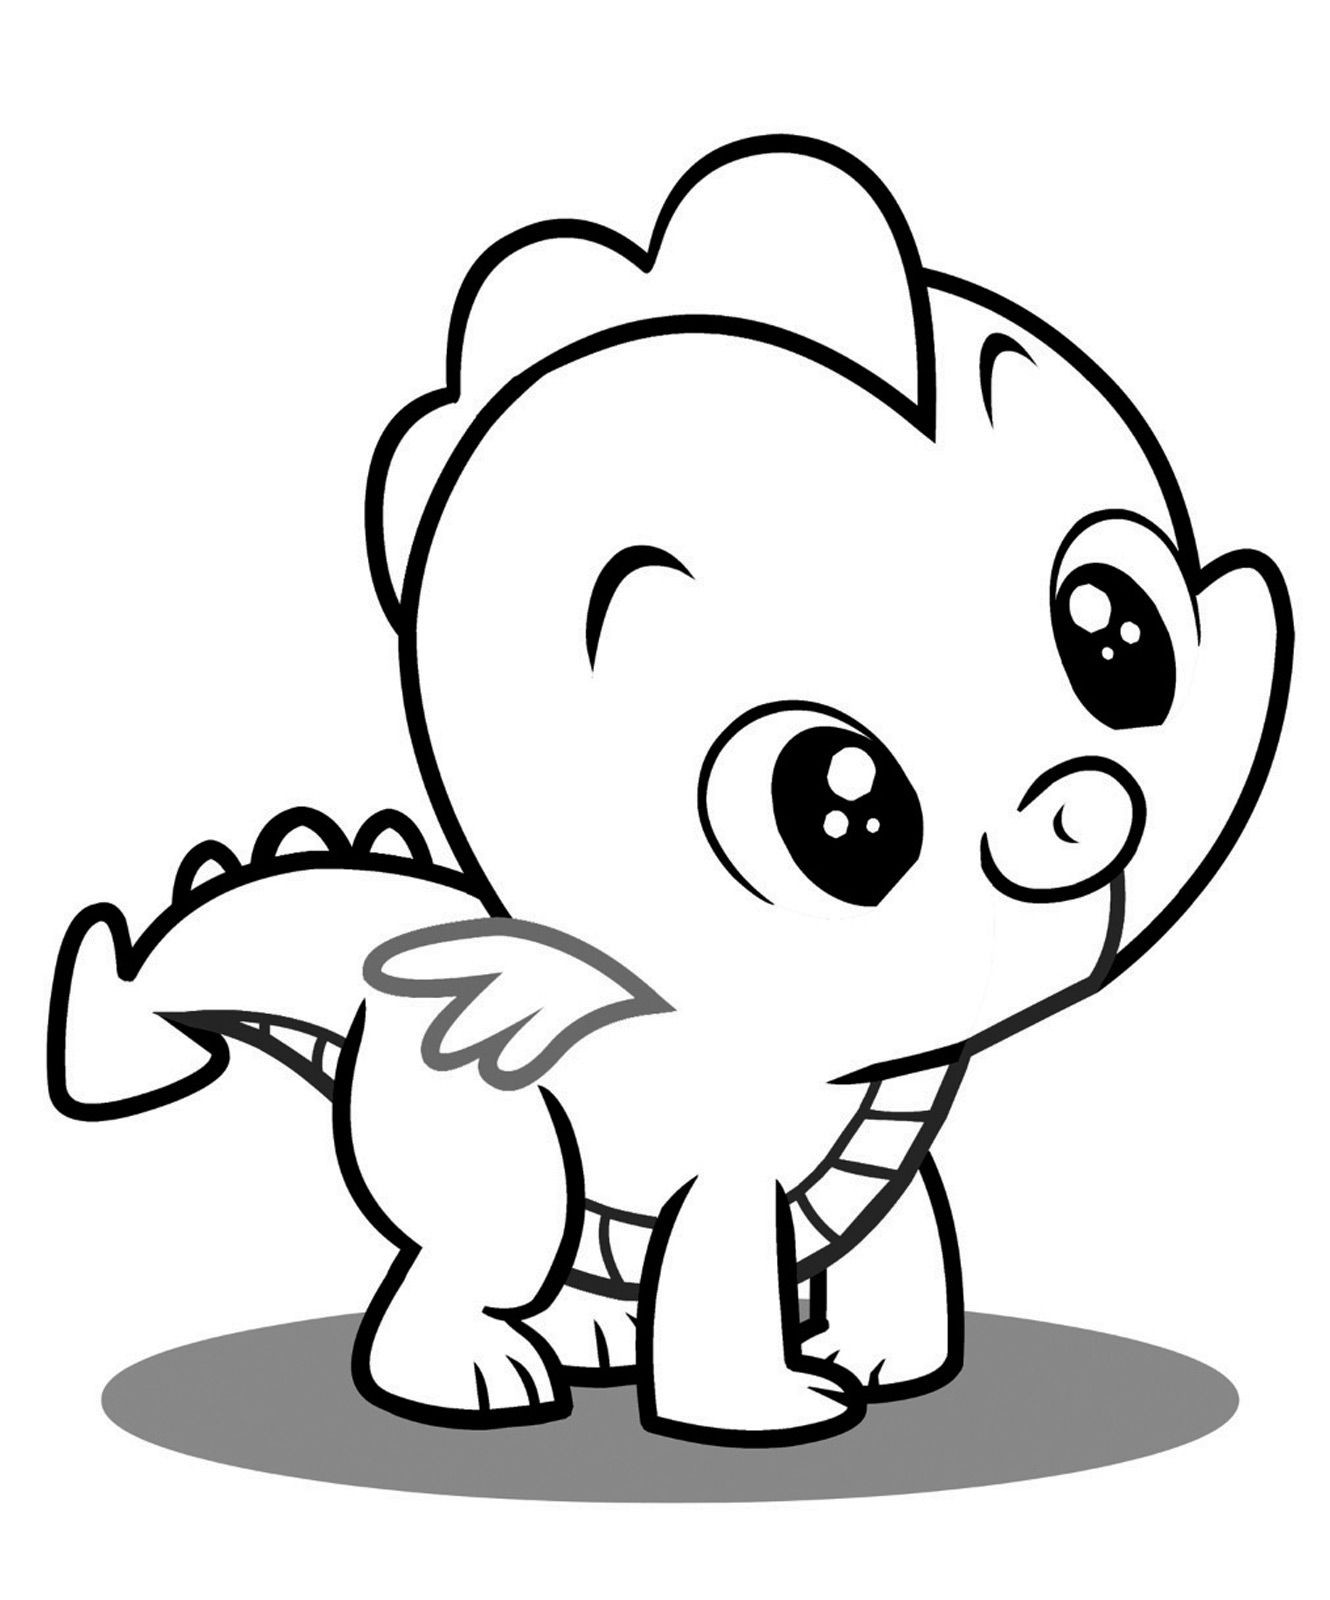 My Little Pony Baby Coloring Pages
 My Little Pony Friendship Is Magic is an animated